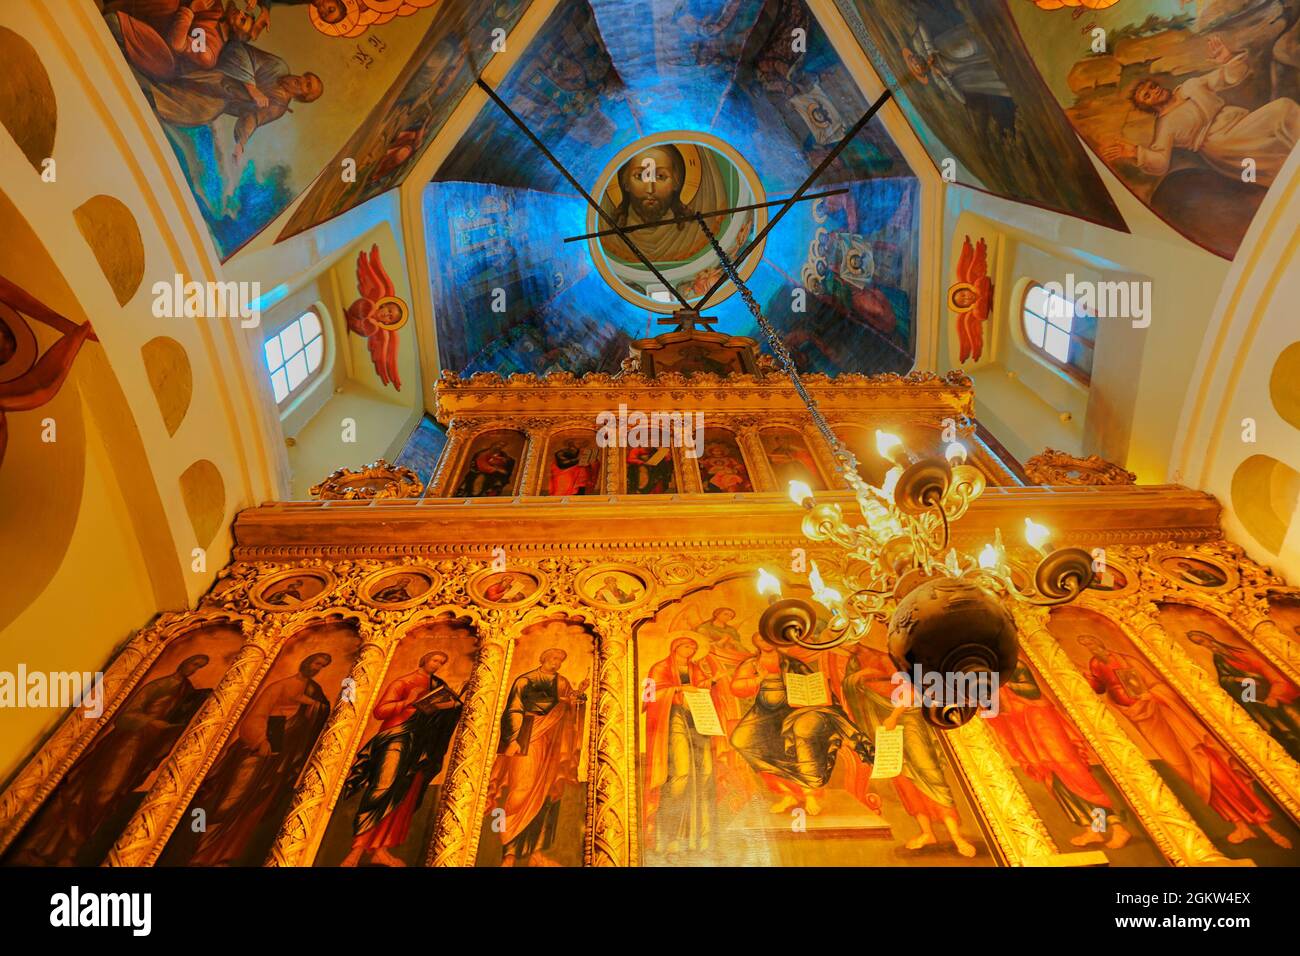 KREMLIN SQUARE , MOSCOW , RUSSIA - APRIL 27TH 2018 : Artwork on the wall inside world famous UNESCO site St. Basil's Cathedral at Kremlin sqaure, Mosc Stock Photo